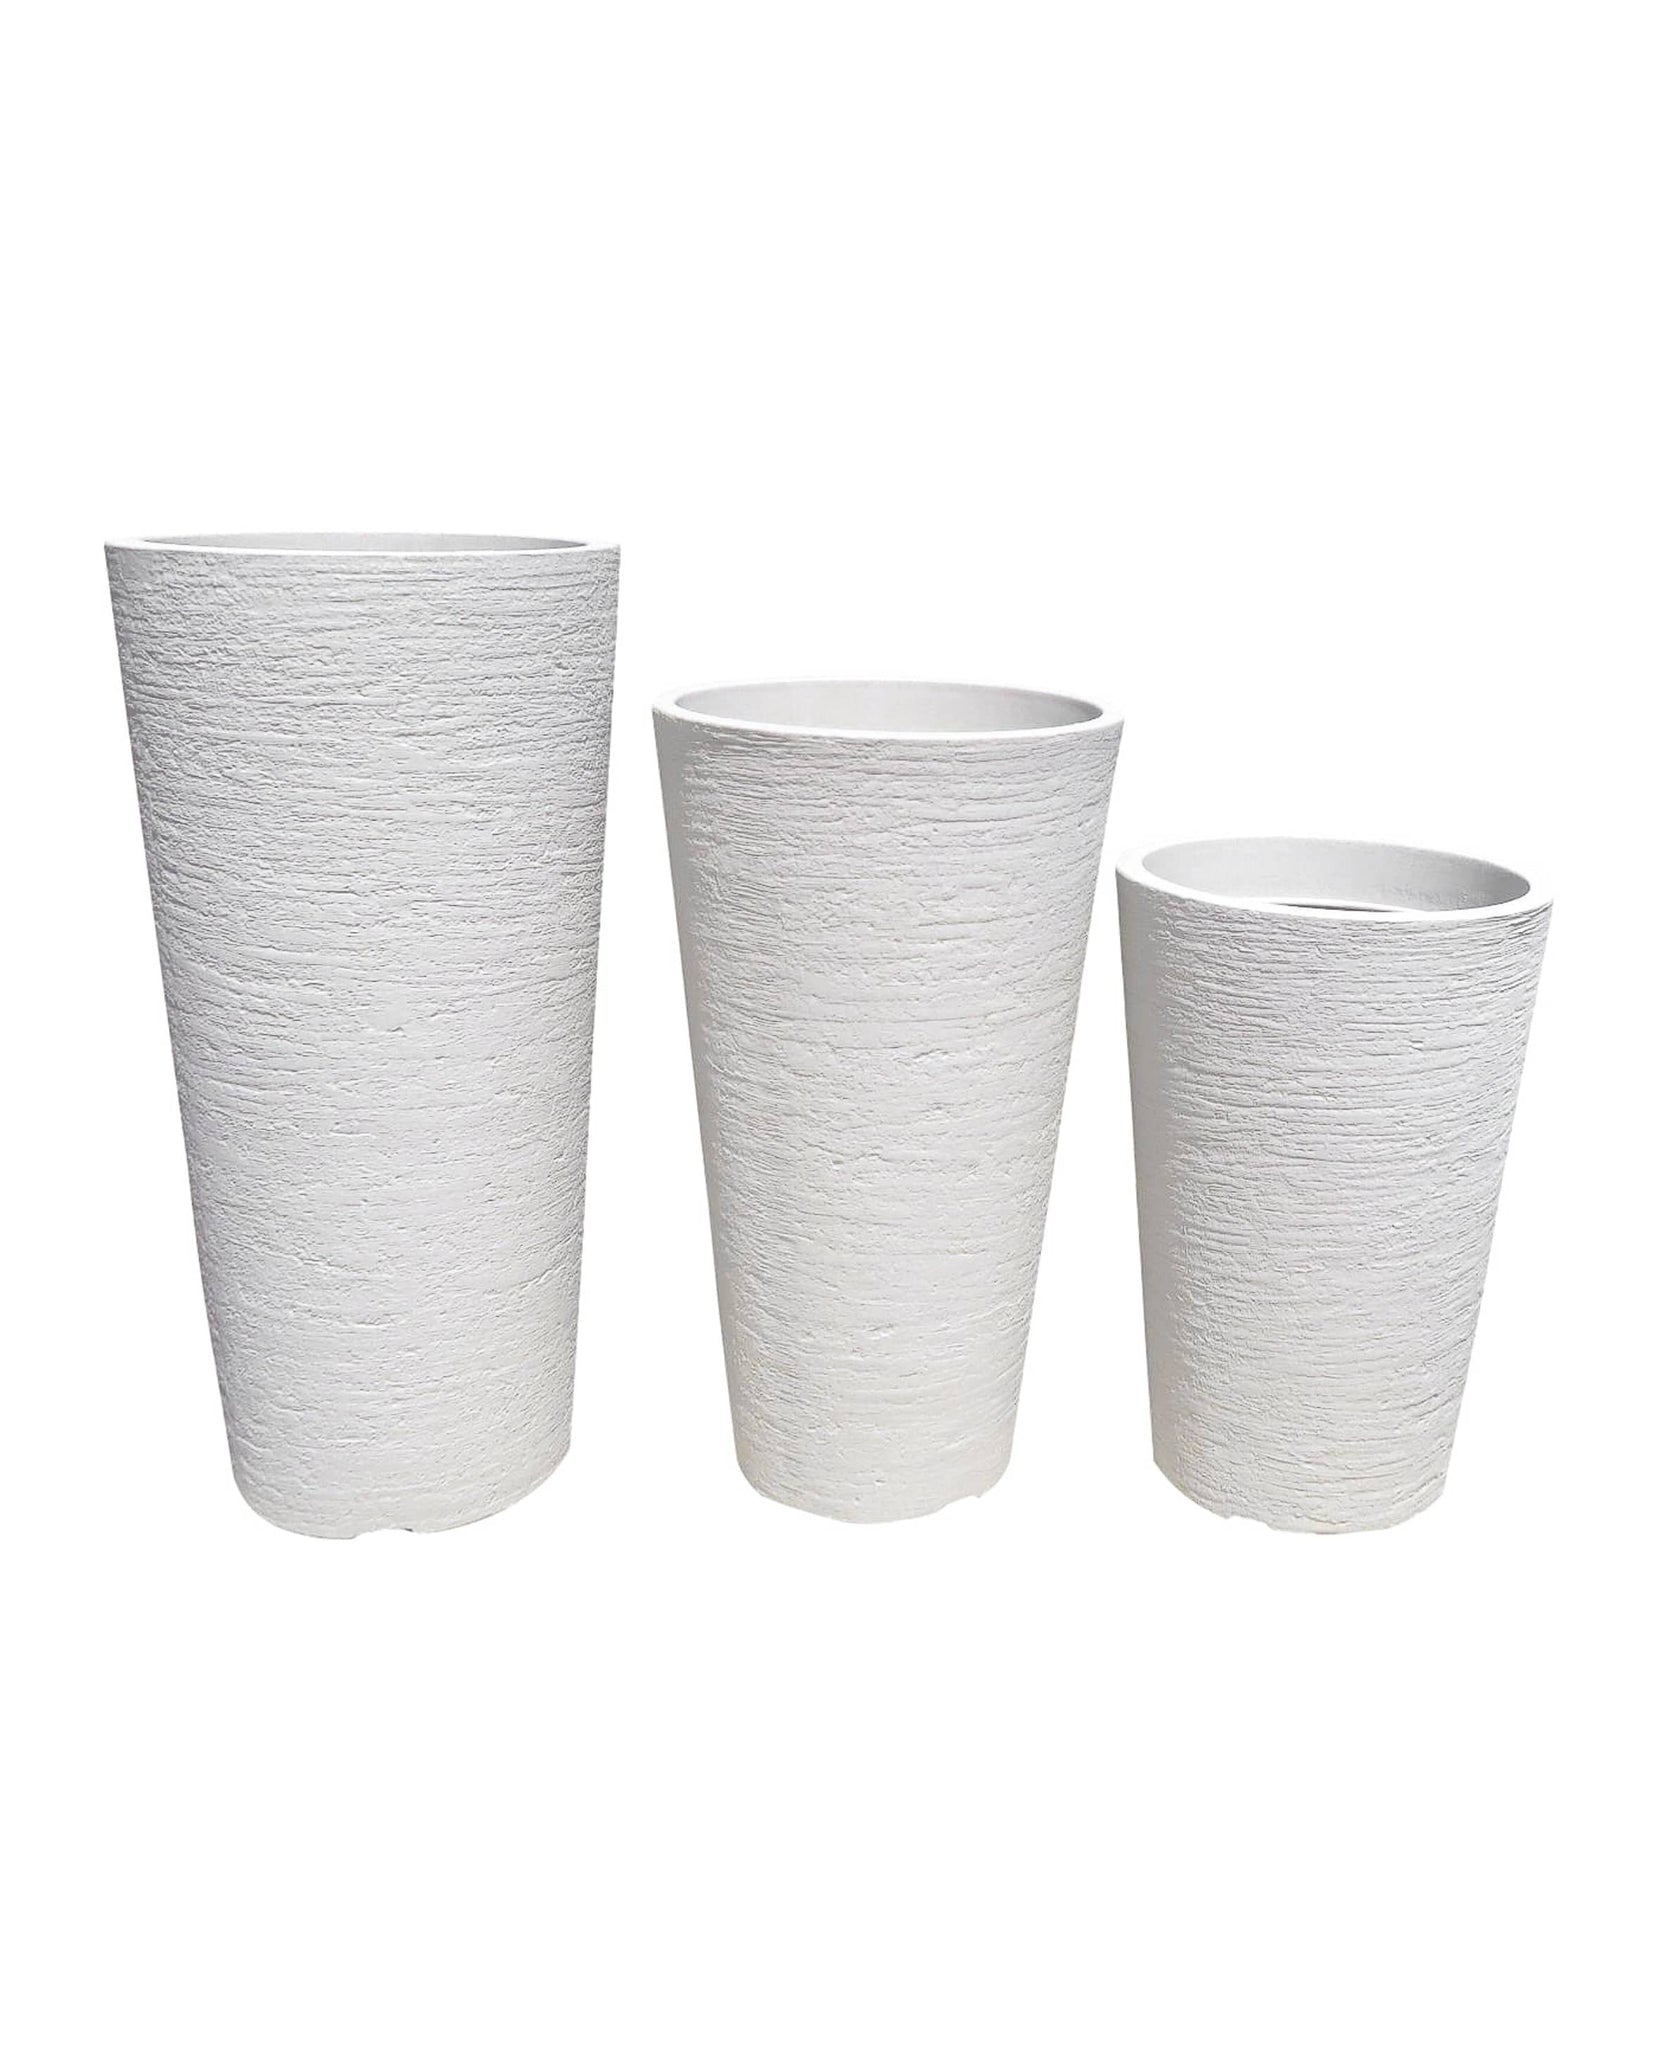 Small, medium and large European Conic Japi planters in a row. Off white colour, textured finish. Modern planters suitable for any style of decor.